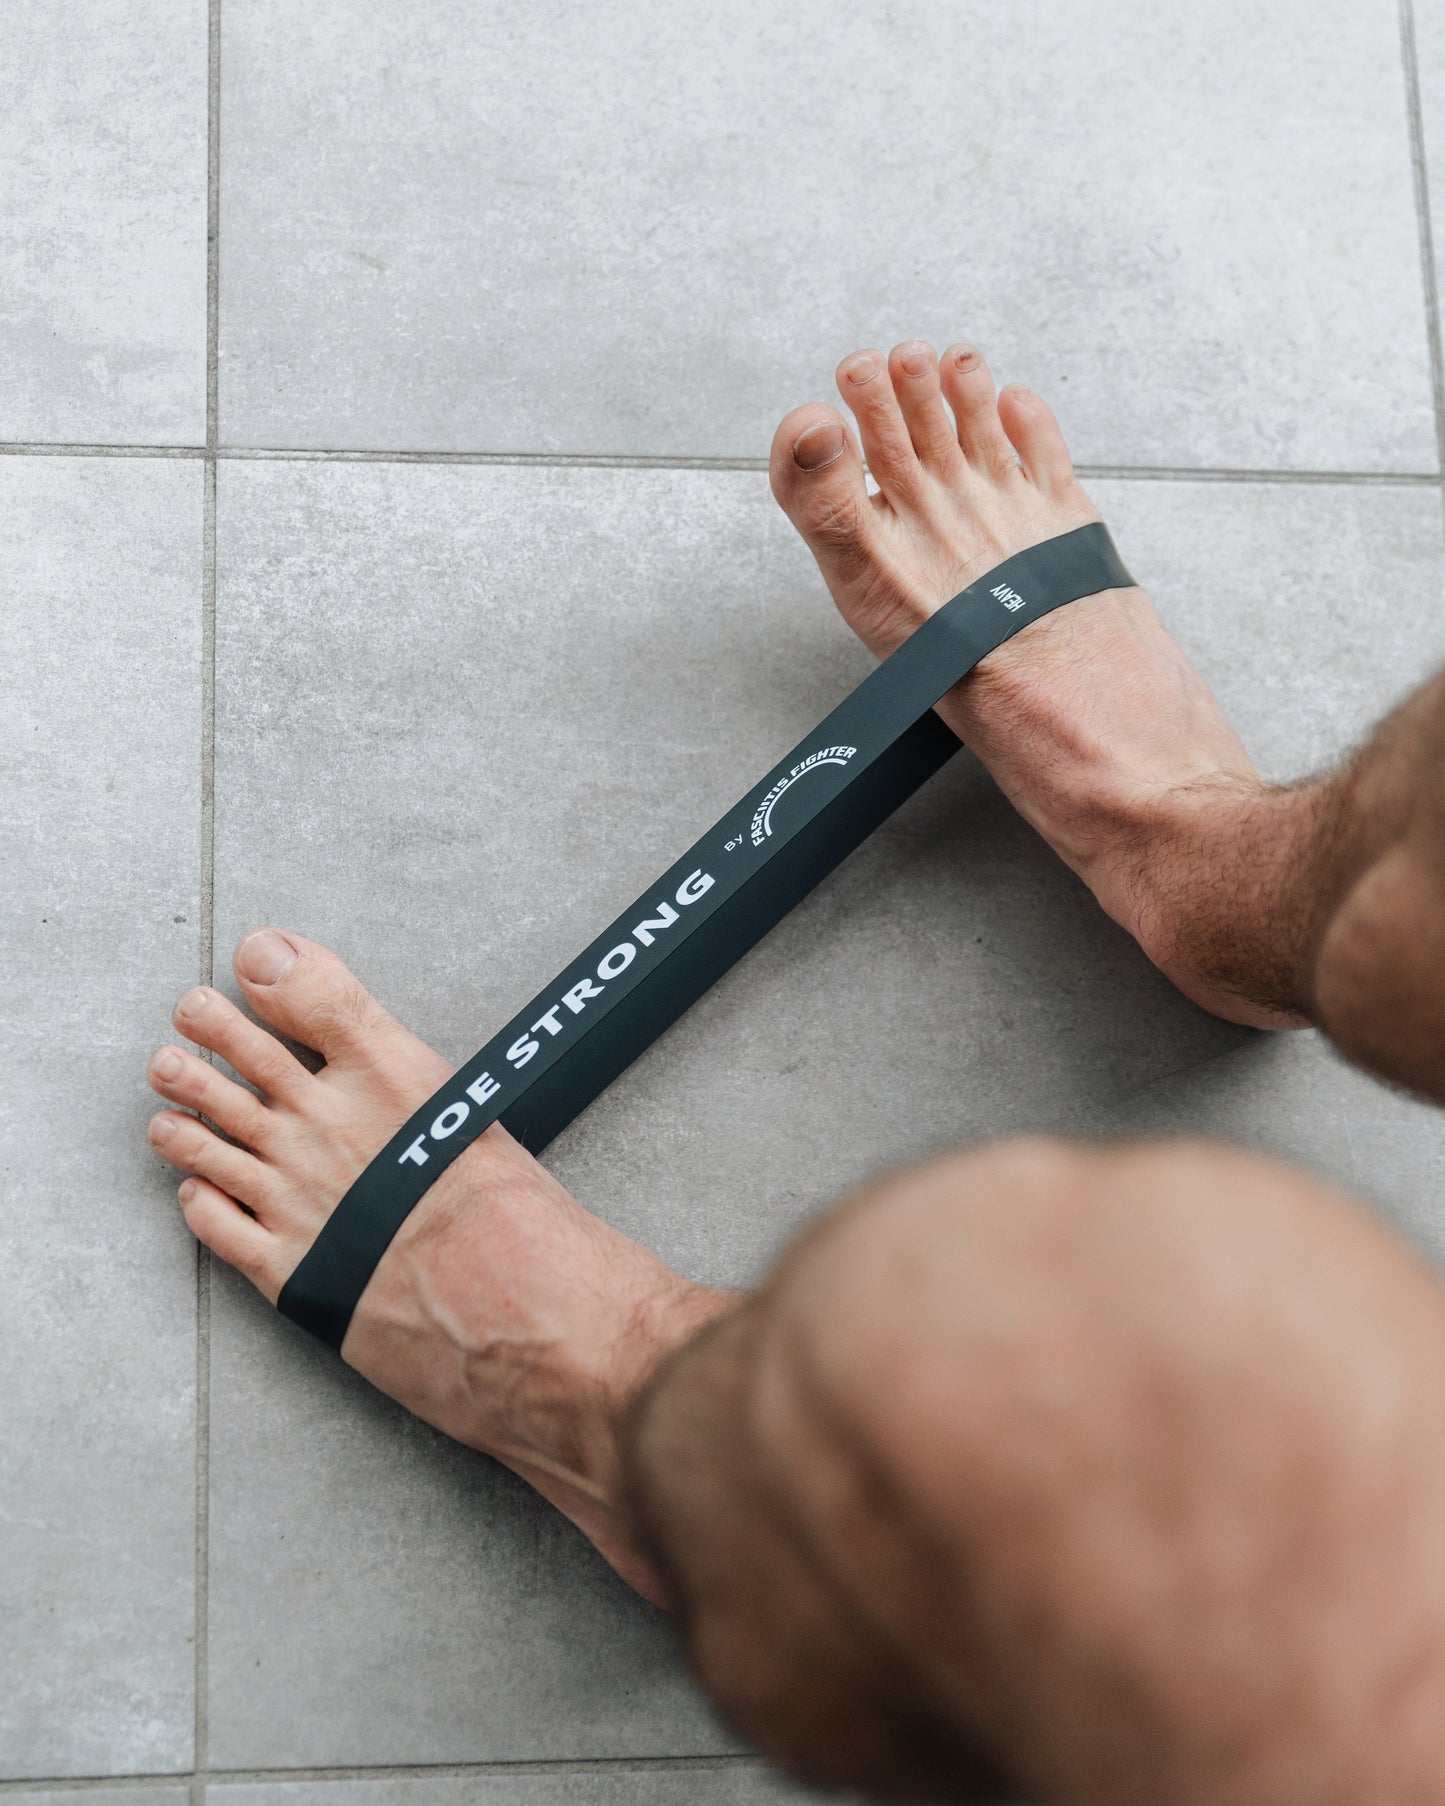 Toe Strong Resistance Bands